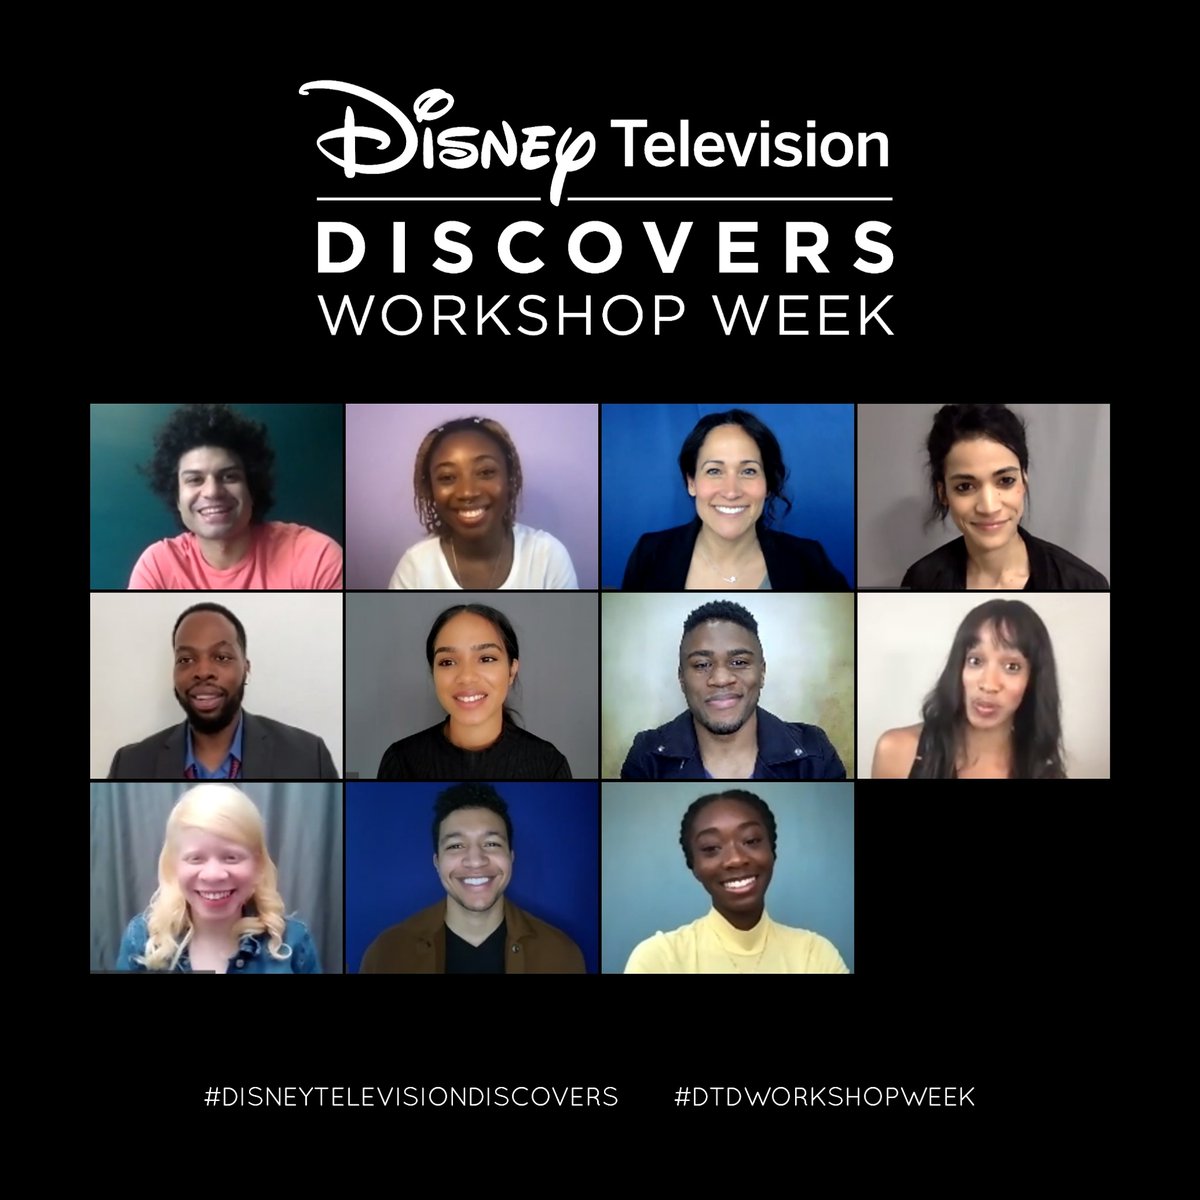 Our 2021 Disney Television Discovers: Workshop Week in New York continues with actors of Classical Theatre of Harlem. Thanks for joining remotely! #DisneyTelevisionDiscovers #DTDWorkshopWeek